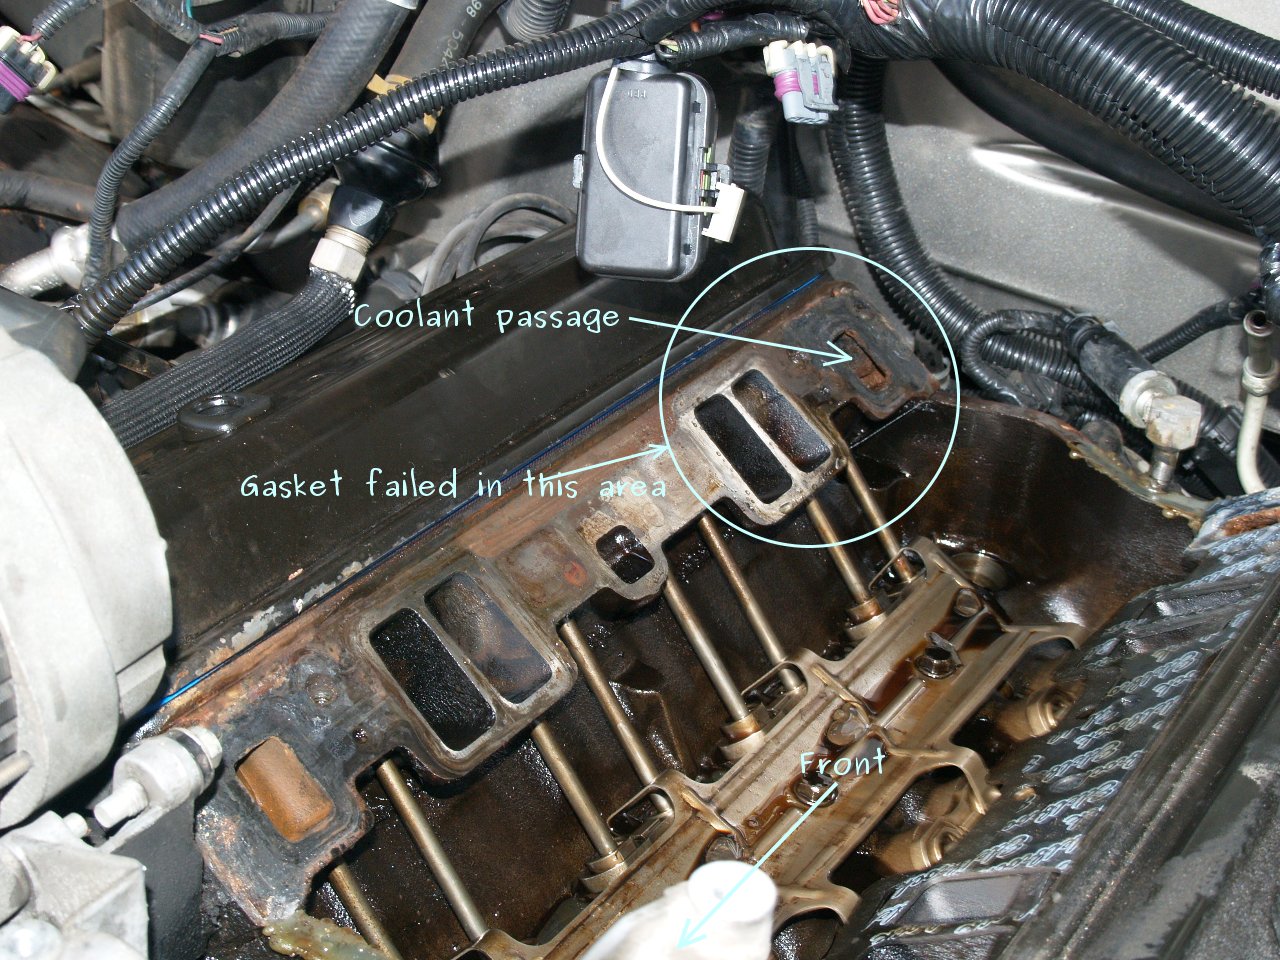 See P0893 in engine